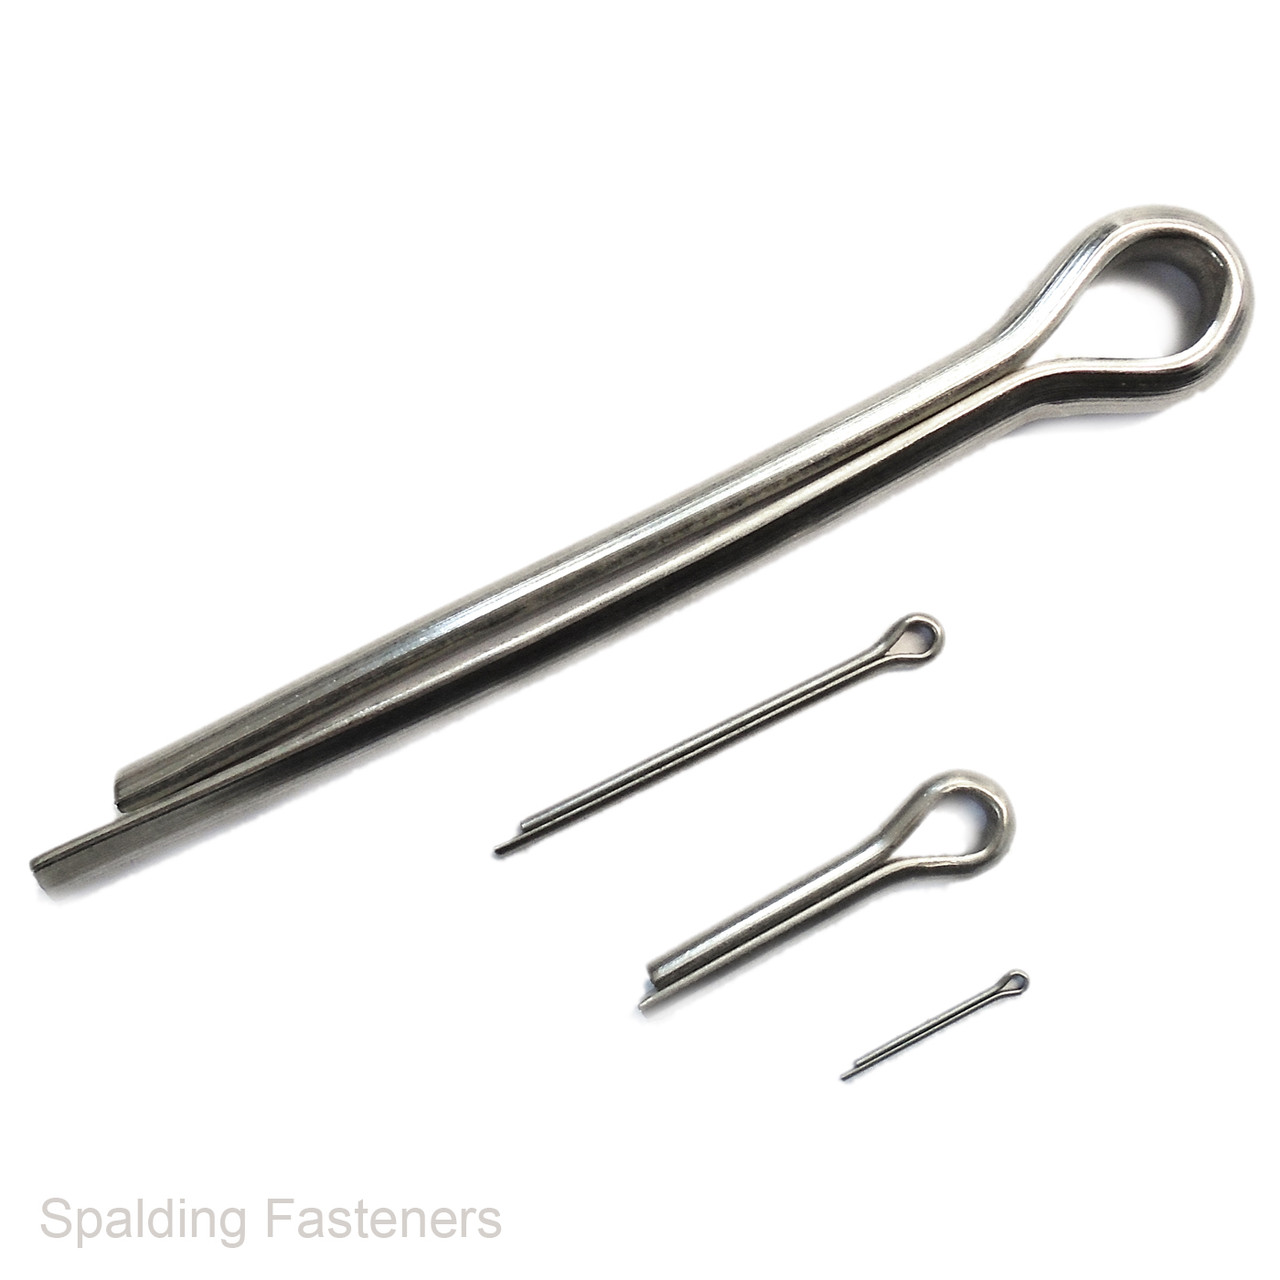 5/64" A2 Grade Stainless Steel Split Cotter Pins